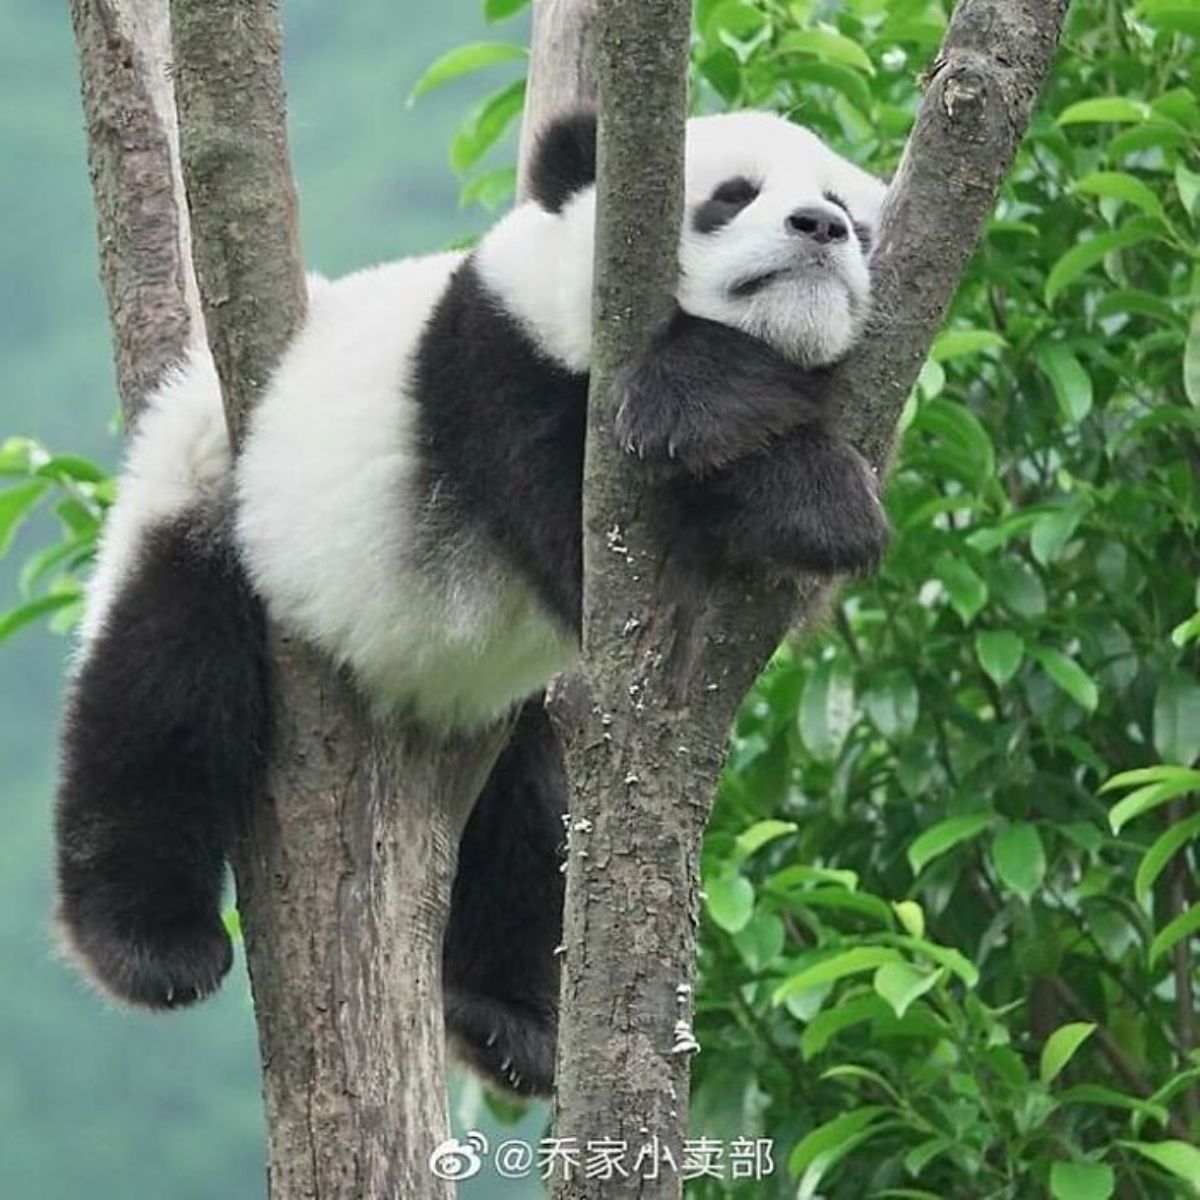 black and white panda laying in a tree with its limbs and head falling through gaps in branches